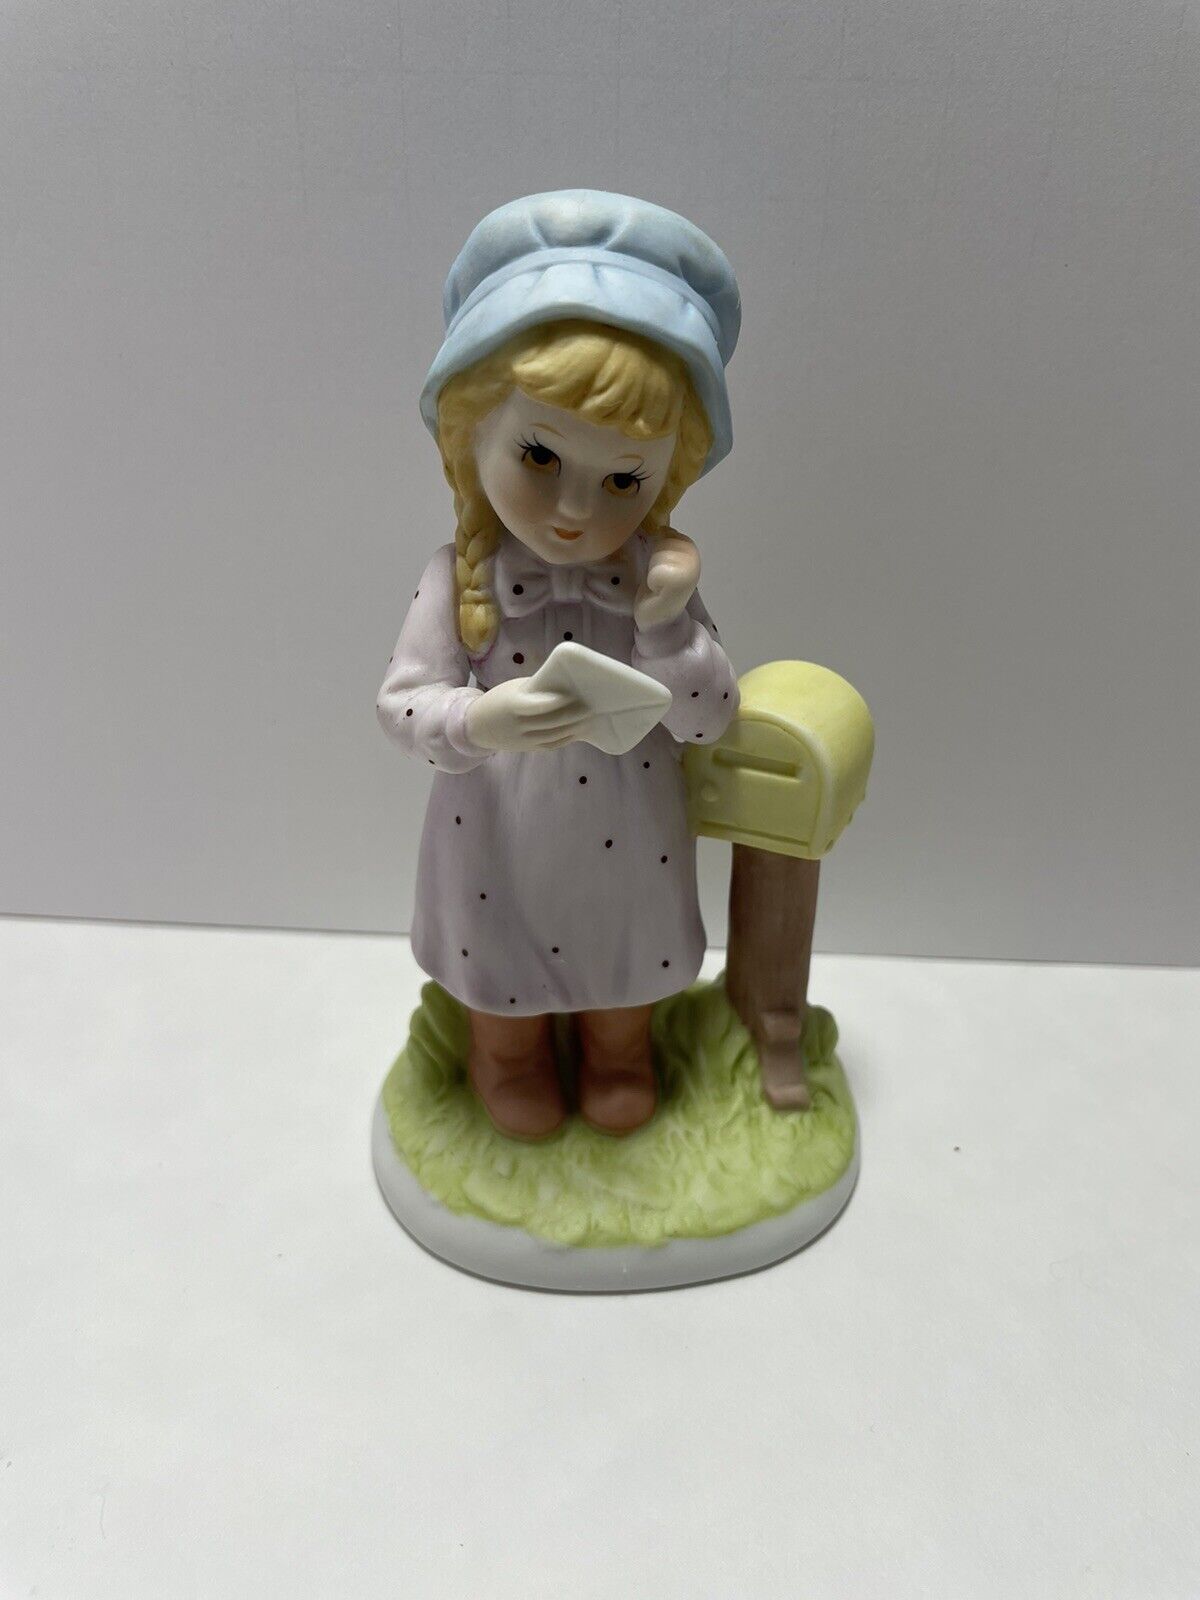 Vintage 1983 Little Girl Figurine. New England Collectors Society Small Wonders.